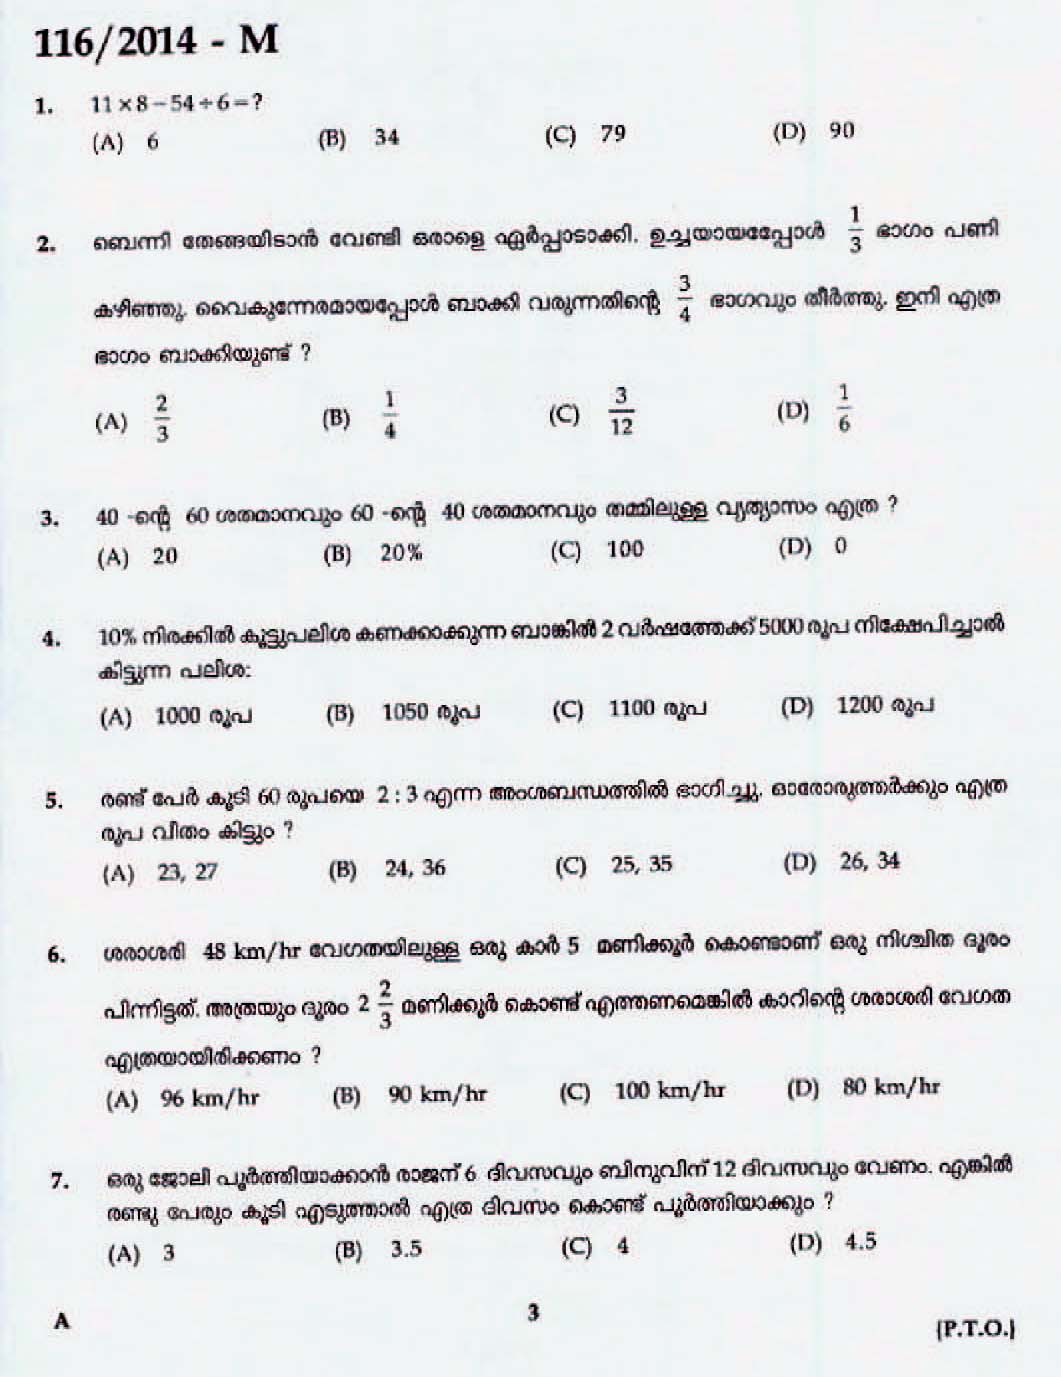 LD Clerk Various All Districts Question Paper Malayalam 2014 Paper Code 1162014 M 1